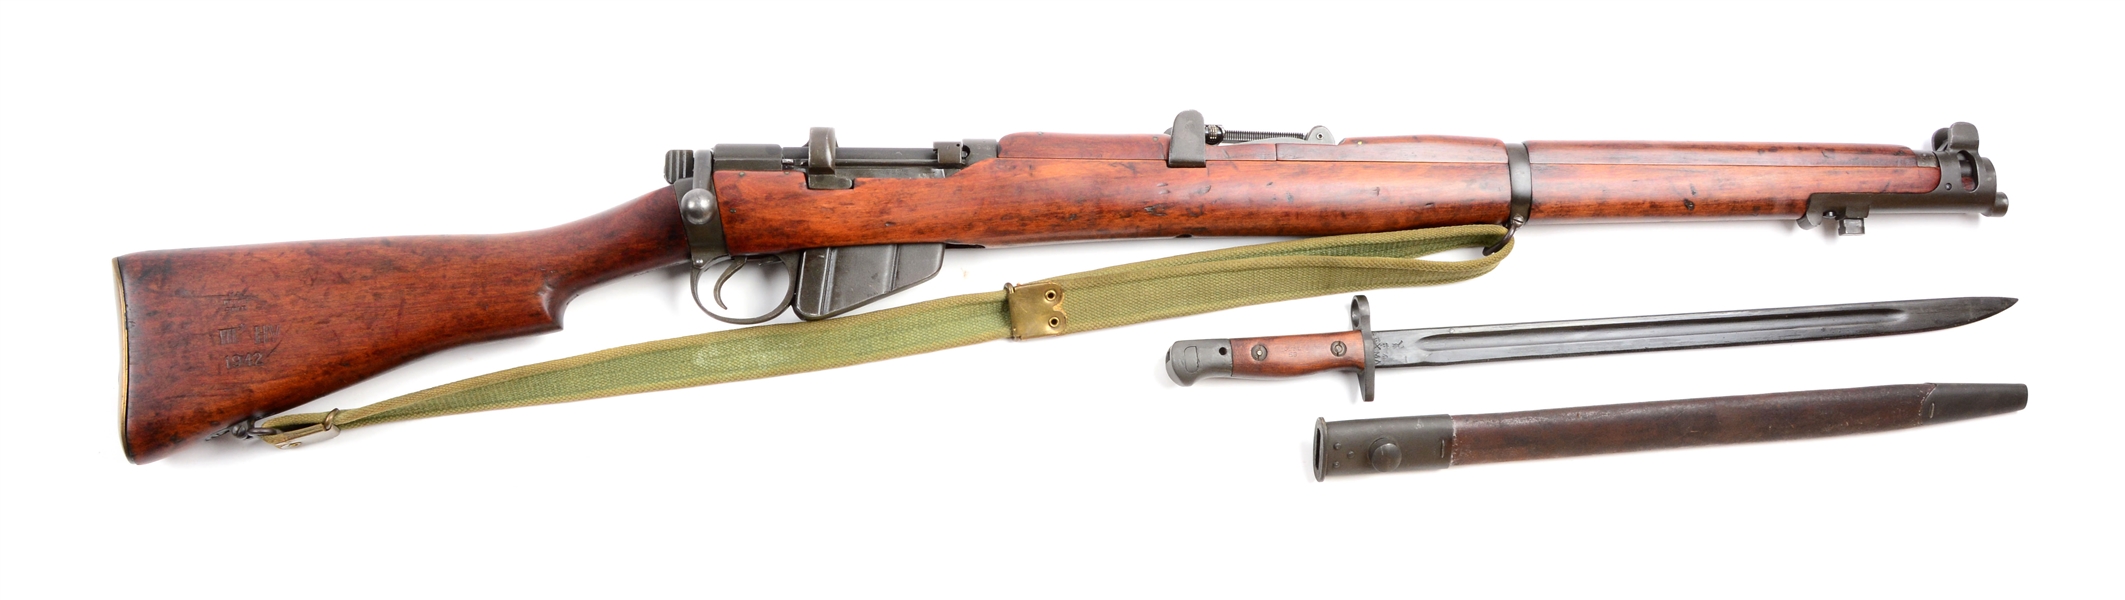 (C) LEE ENFIELD S.M.L.E. MARK III BOLT ACTION RIFLE WITH BAYONET.